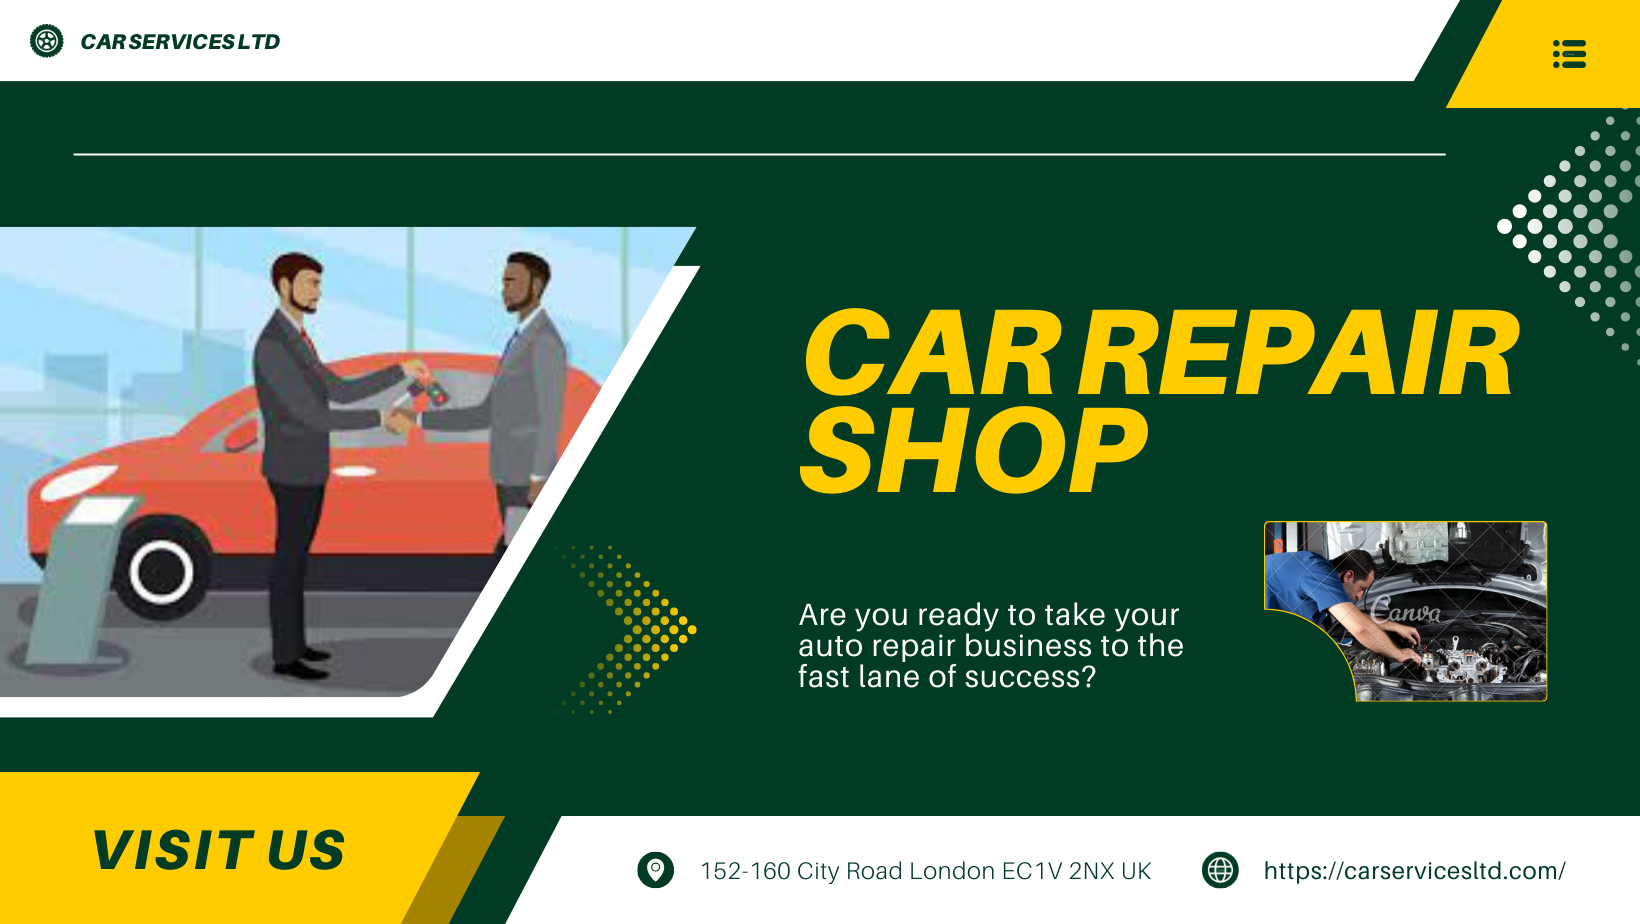 Maximize Your Reach: Join Car Services Ltd and Turbocharge Your Auto Repair Business